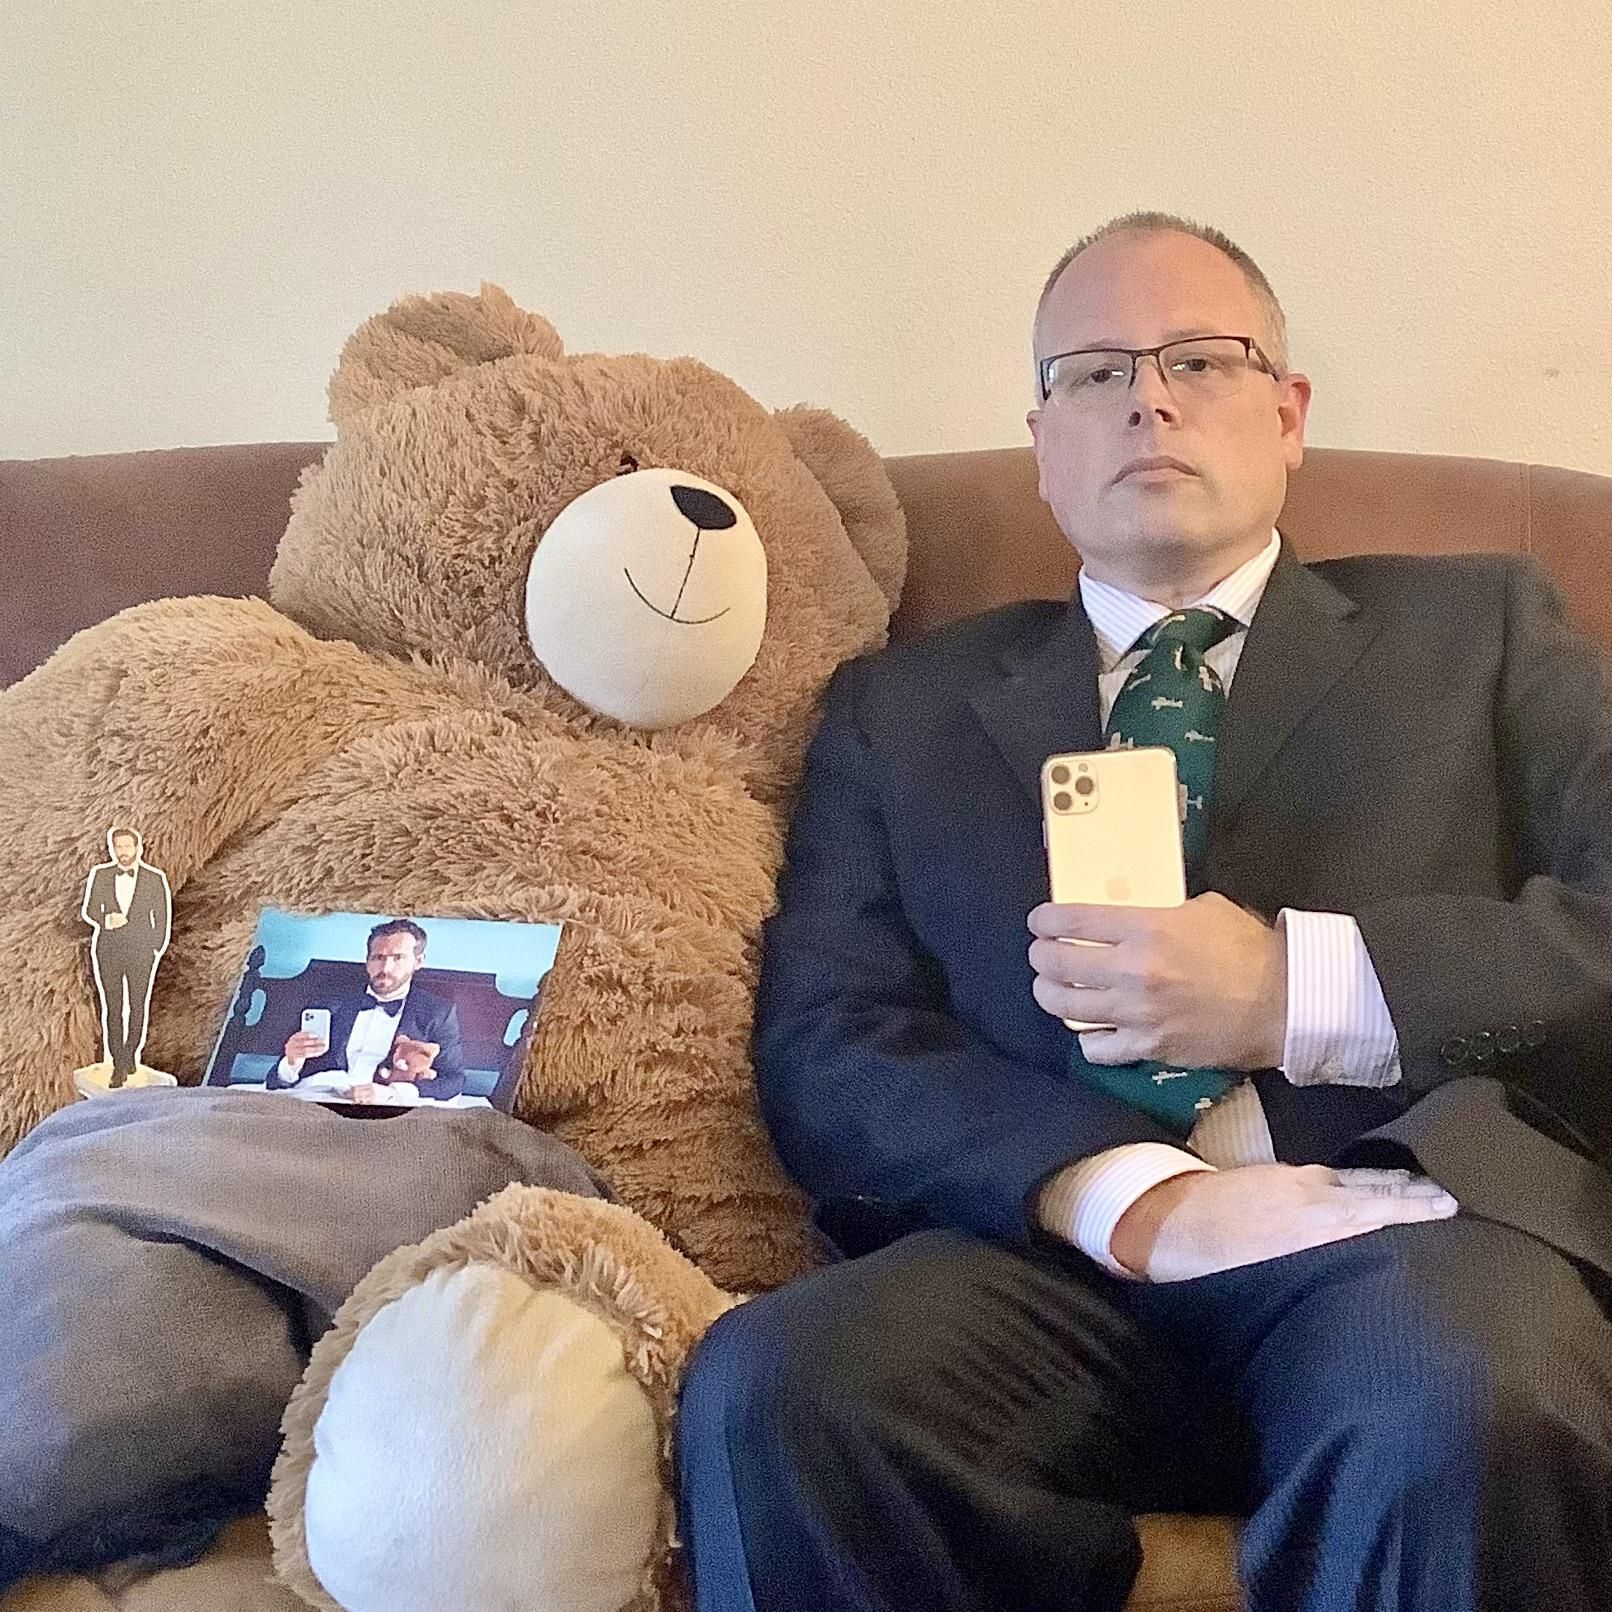 Dear Ryan, I got your Christmas card. Here’s me with my teddy bear and phone. Thanks for owning my phone company.